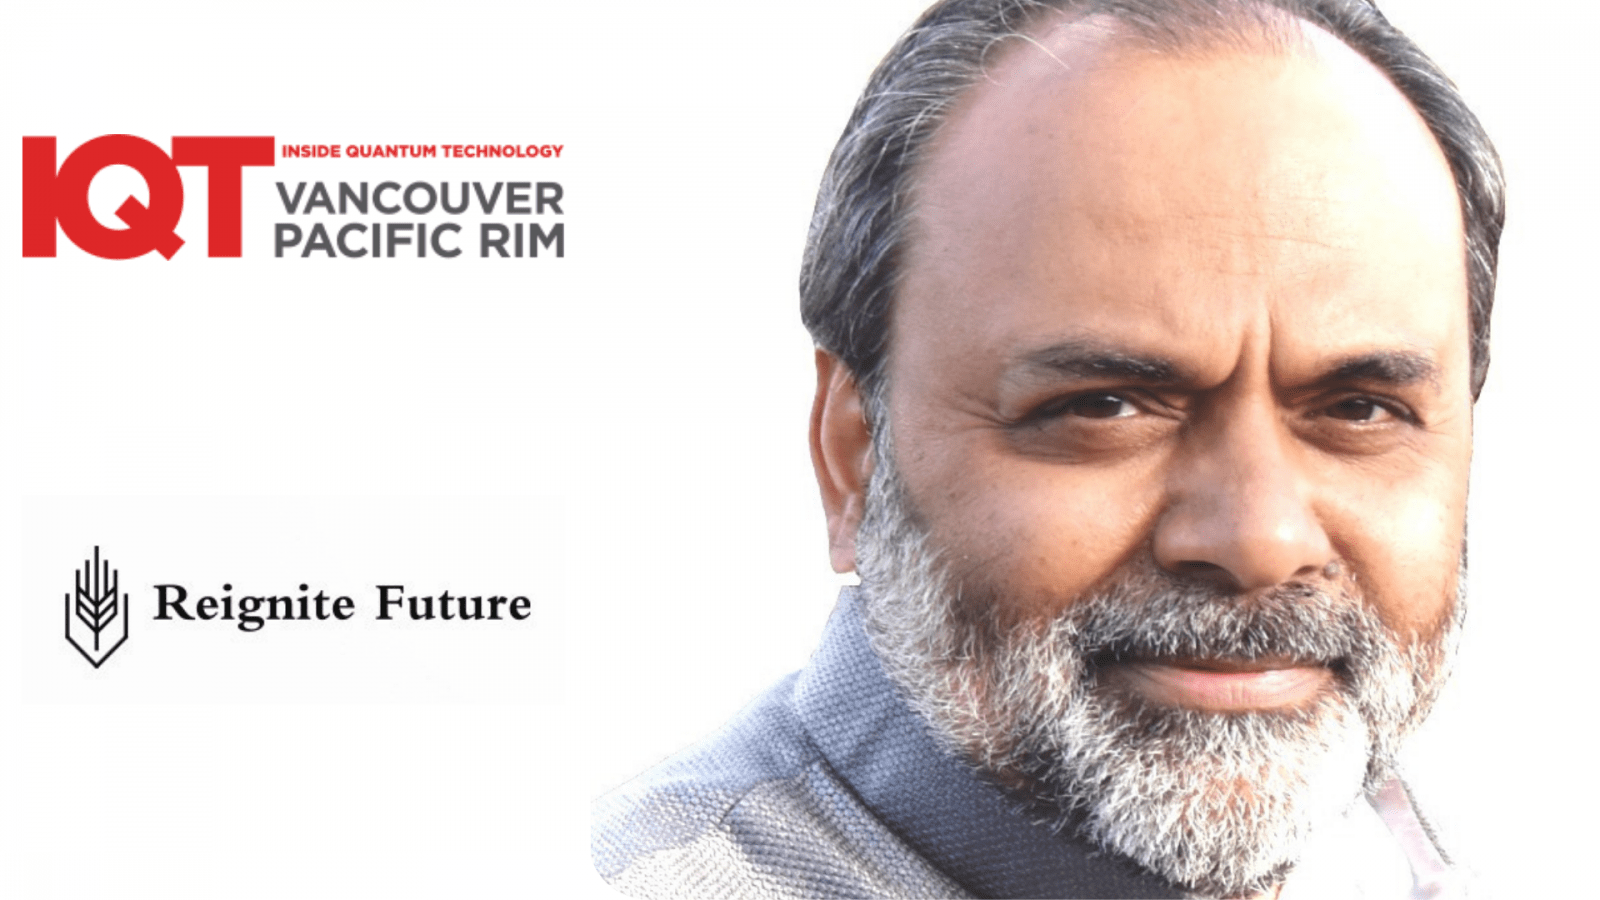 Former Halliburton Technology Fellow and Managing Director of Reignite Future,Satyam Priyadarshy, is an IQT Vancouver/Pacific Rim 2024 Speaker